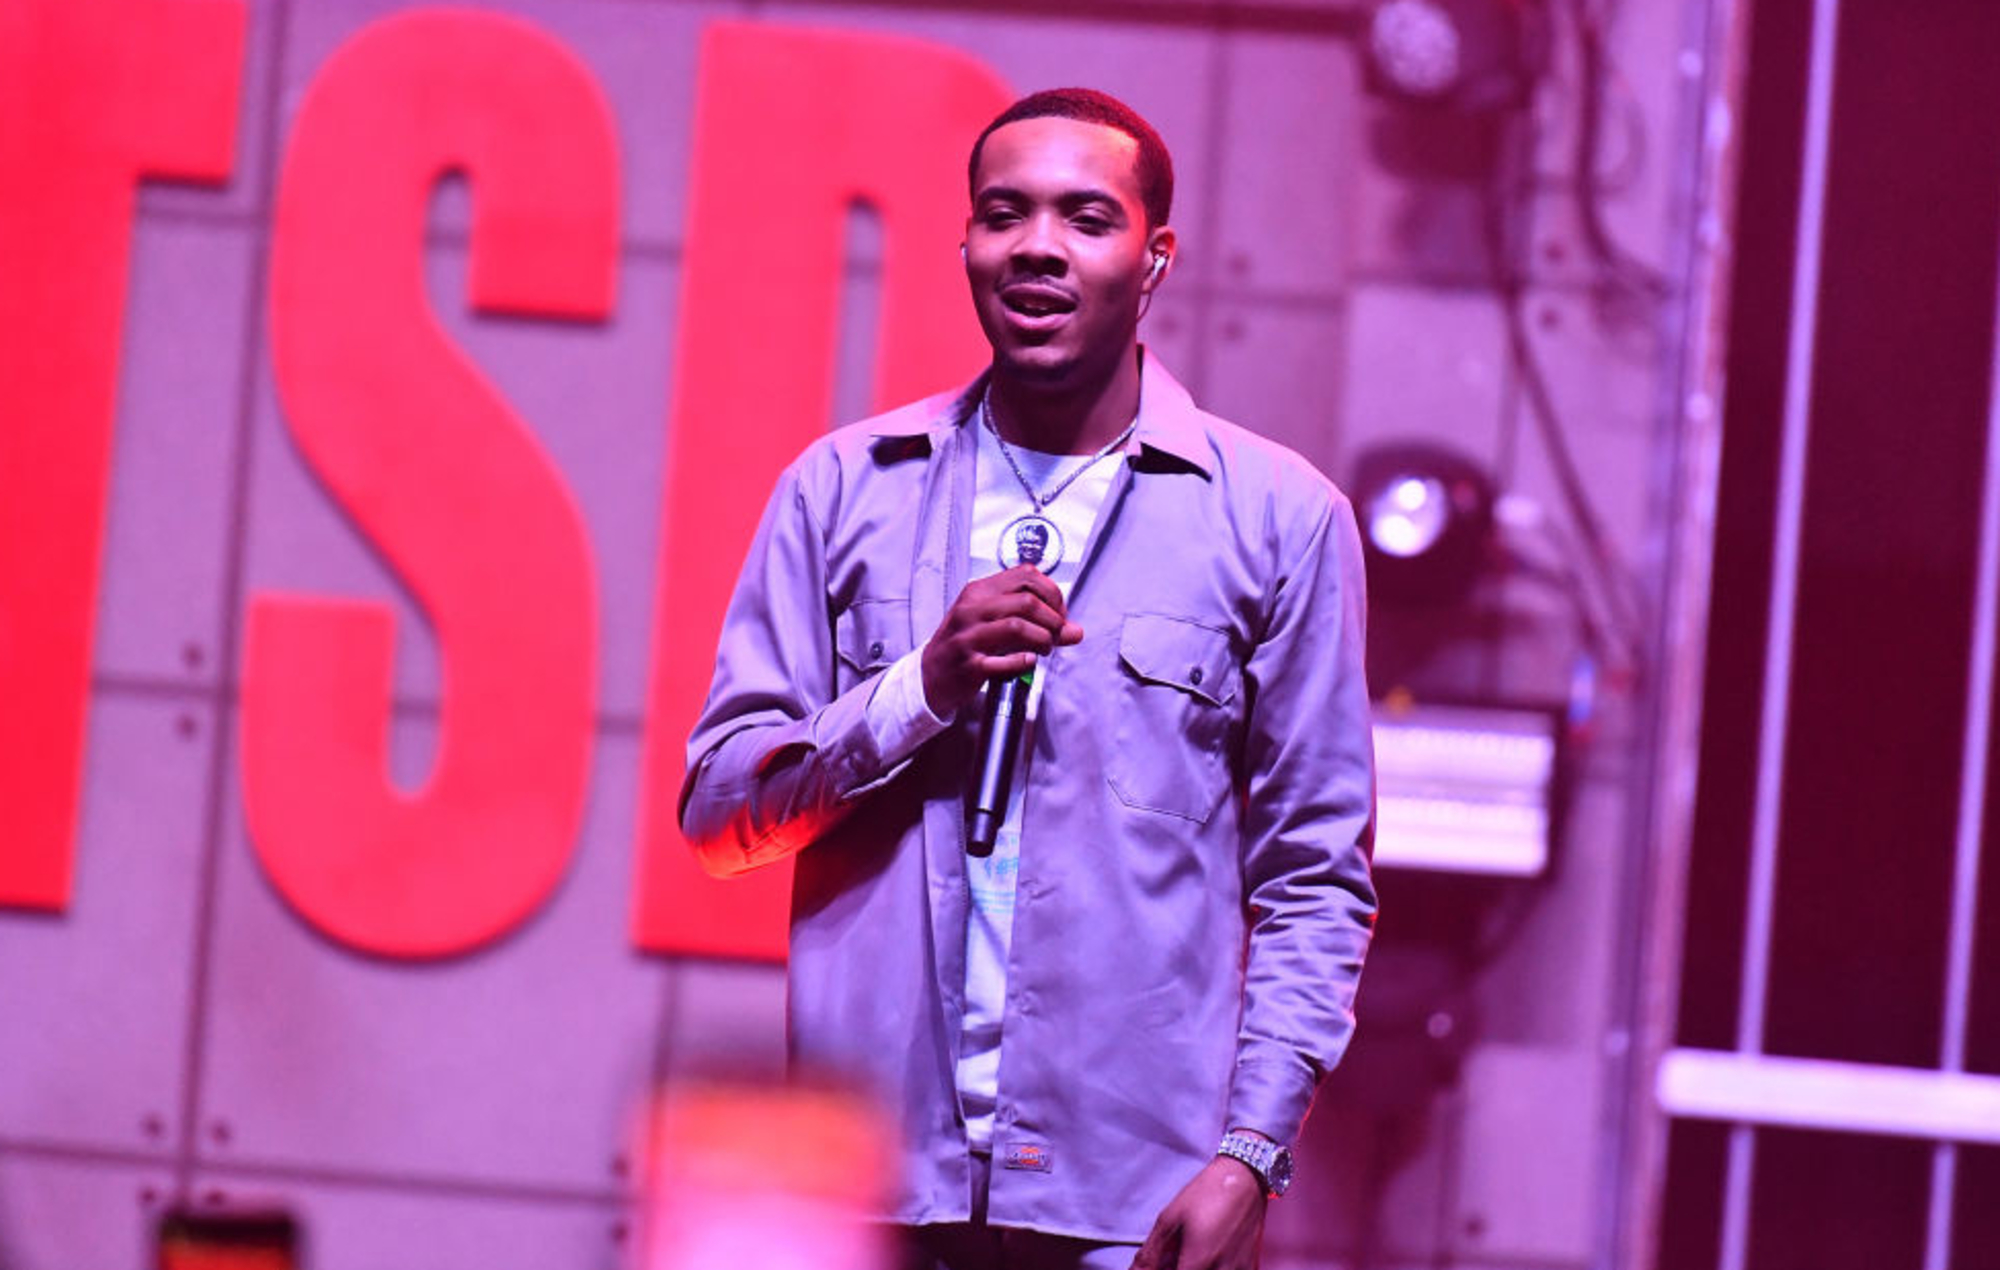 G Herbo Facing Up To 20 Years In Prison After Pleading Guilty to Wire Fraud Charges